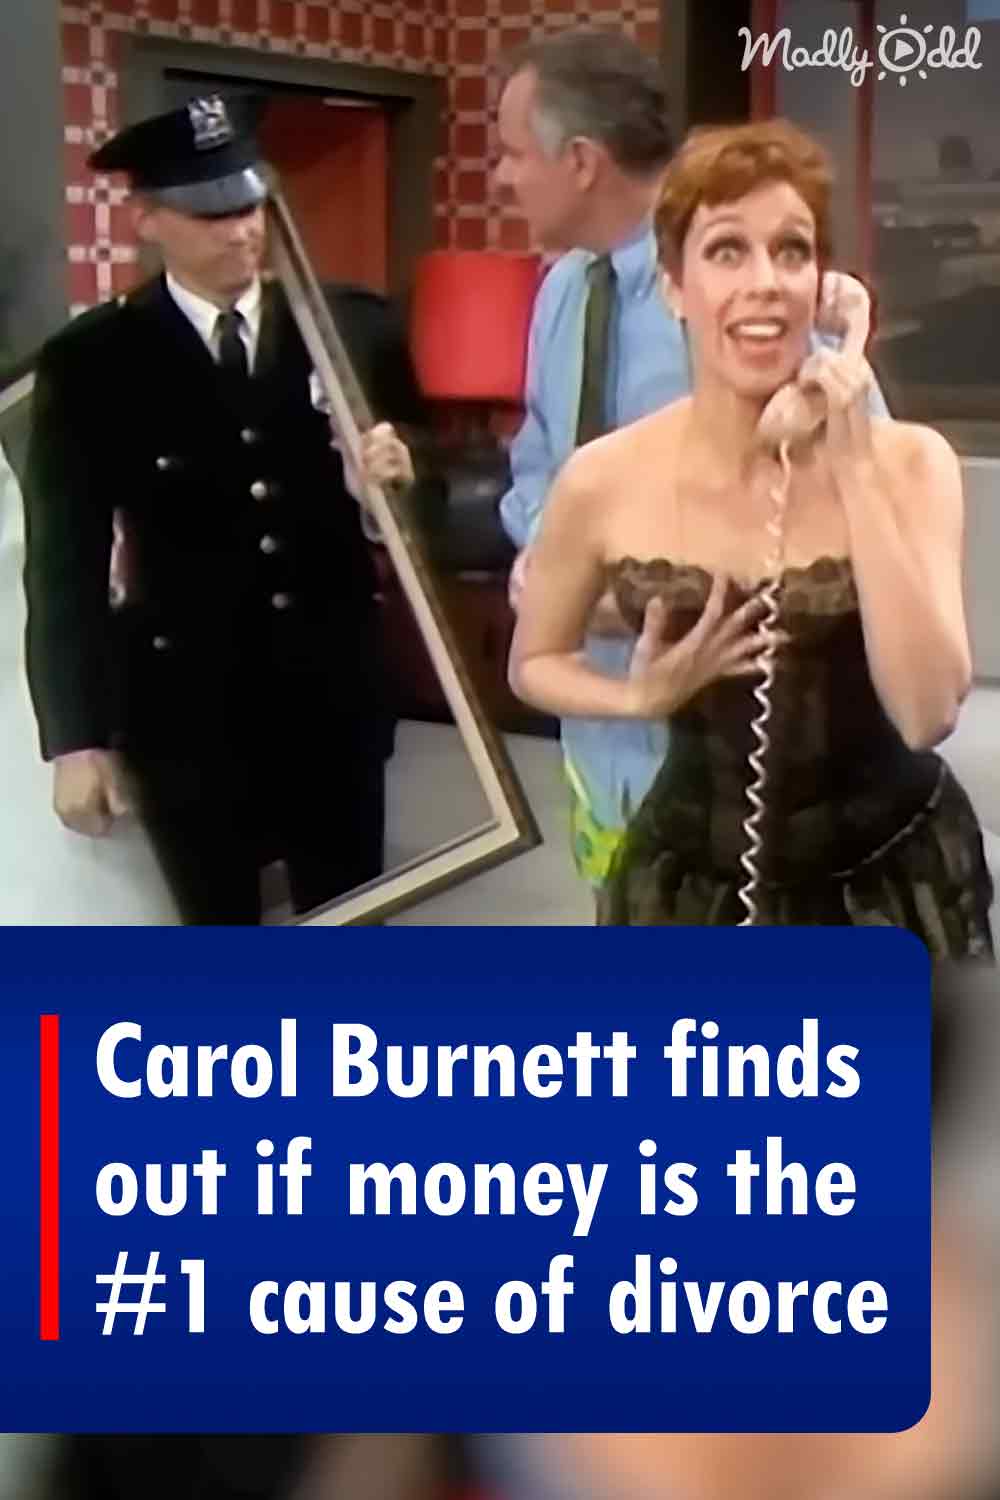 Carol Burnett finds out if money is the #1 cause of divorce